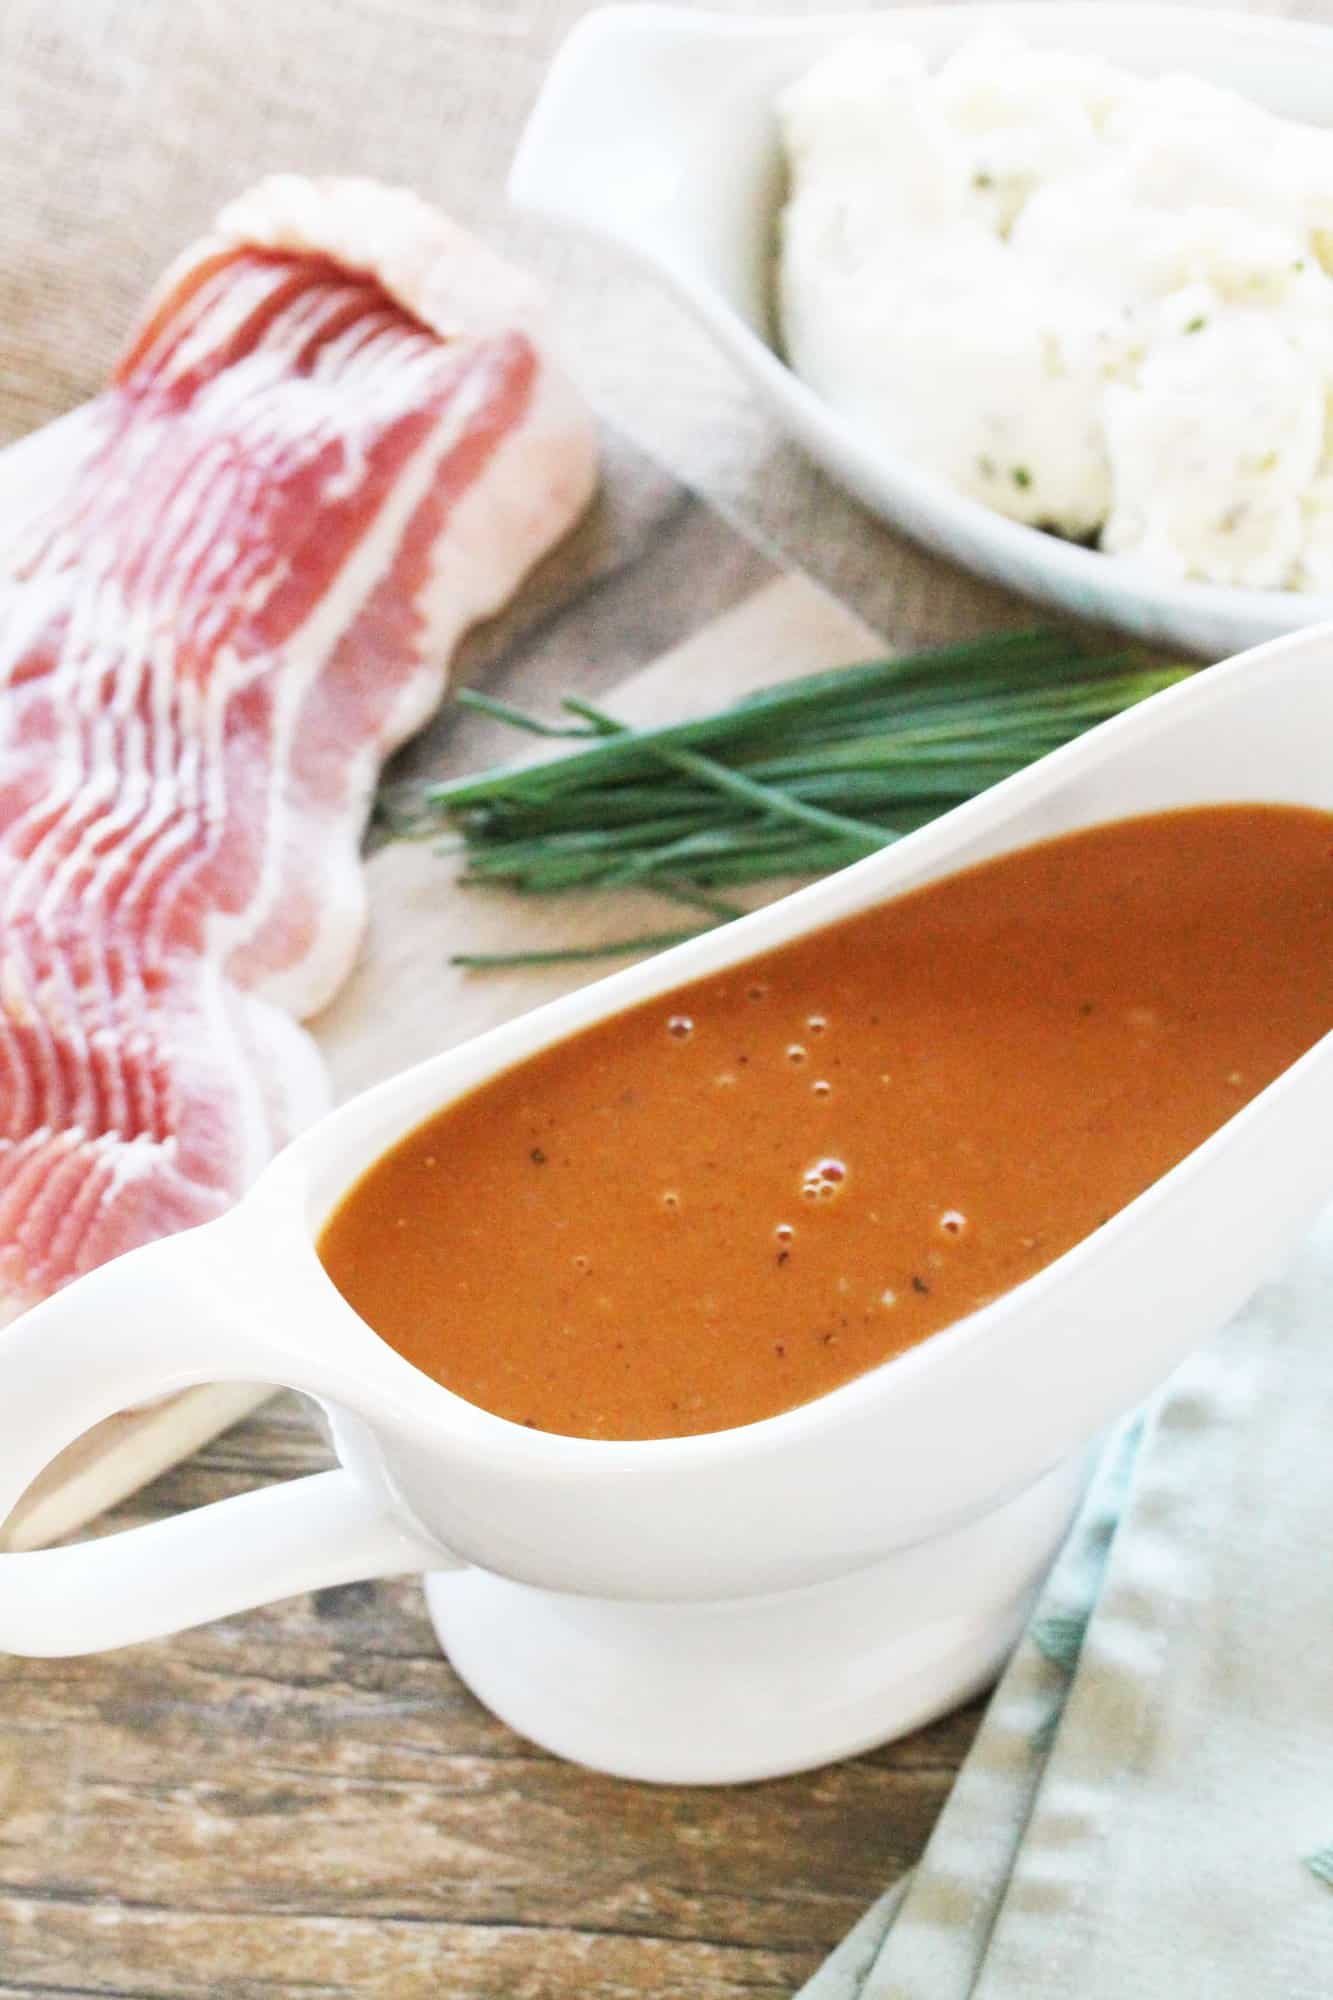 Bacon gravy in a gravy boat by chives and bacon.